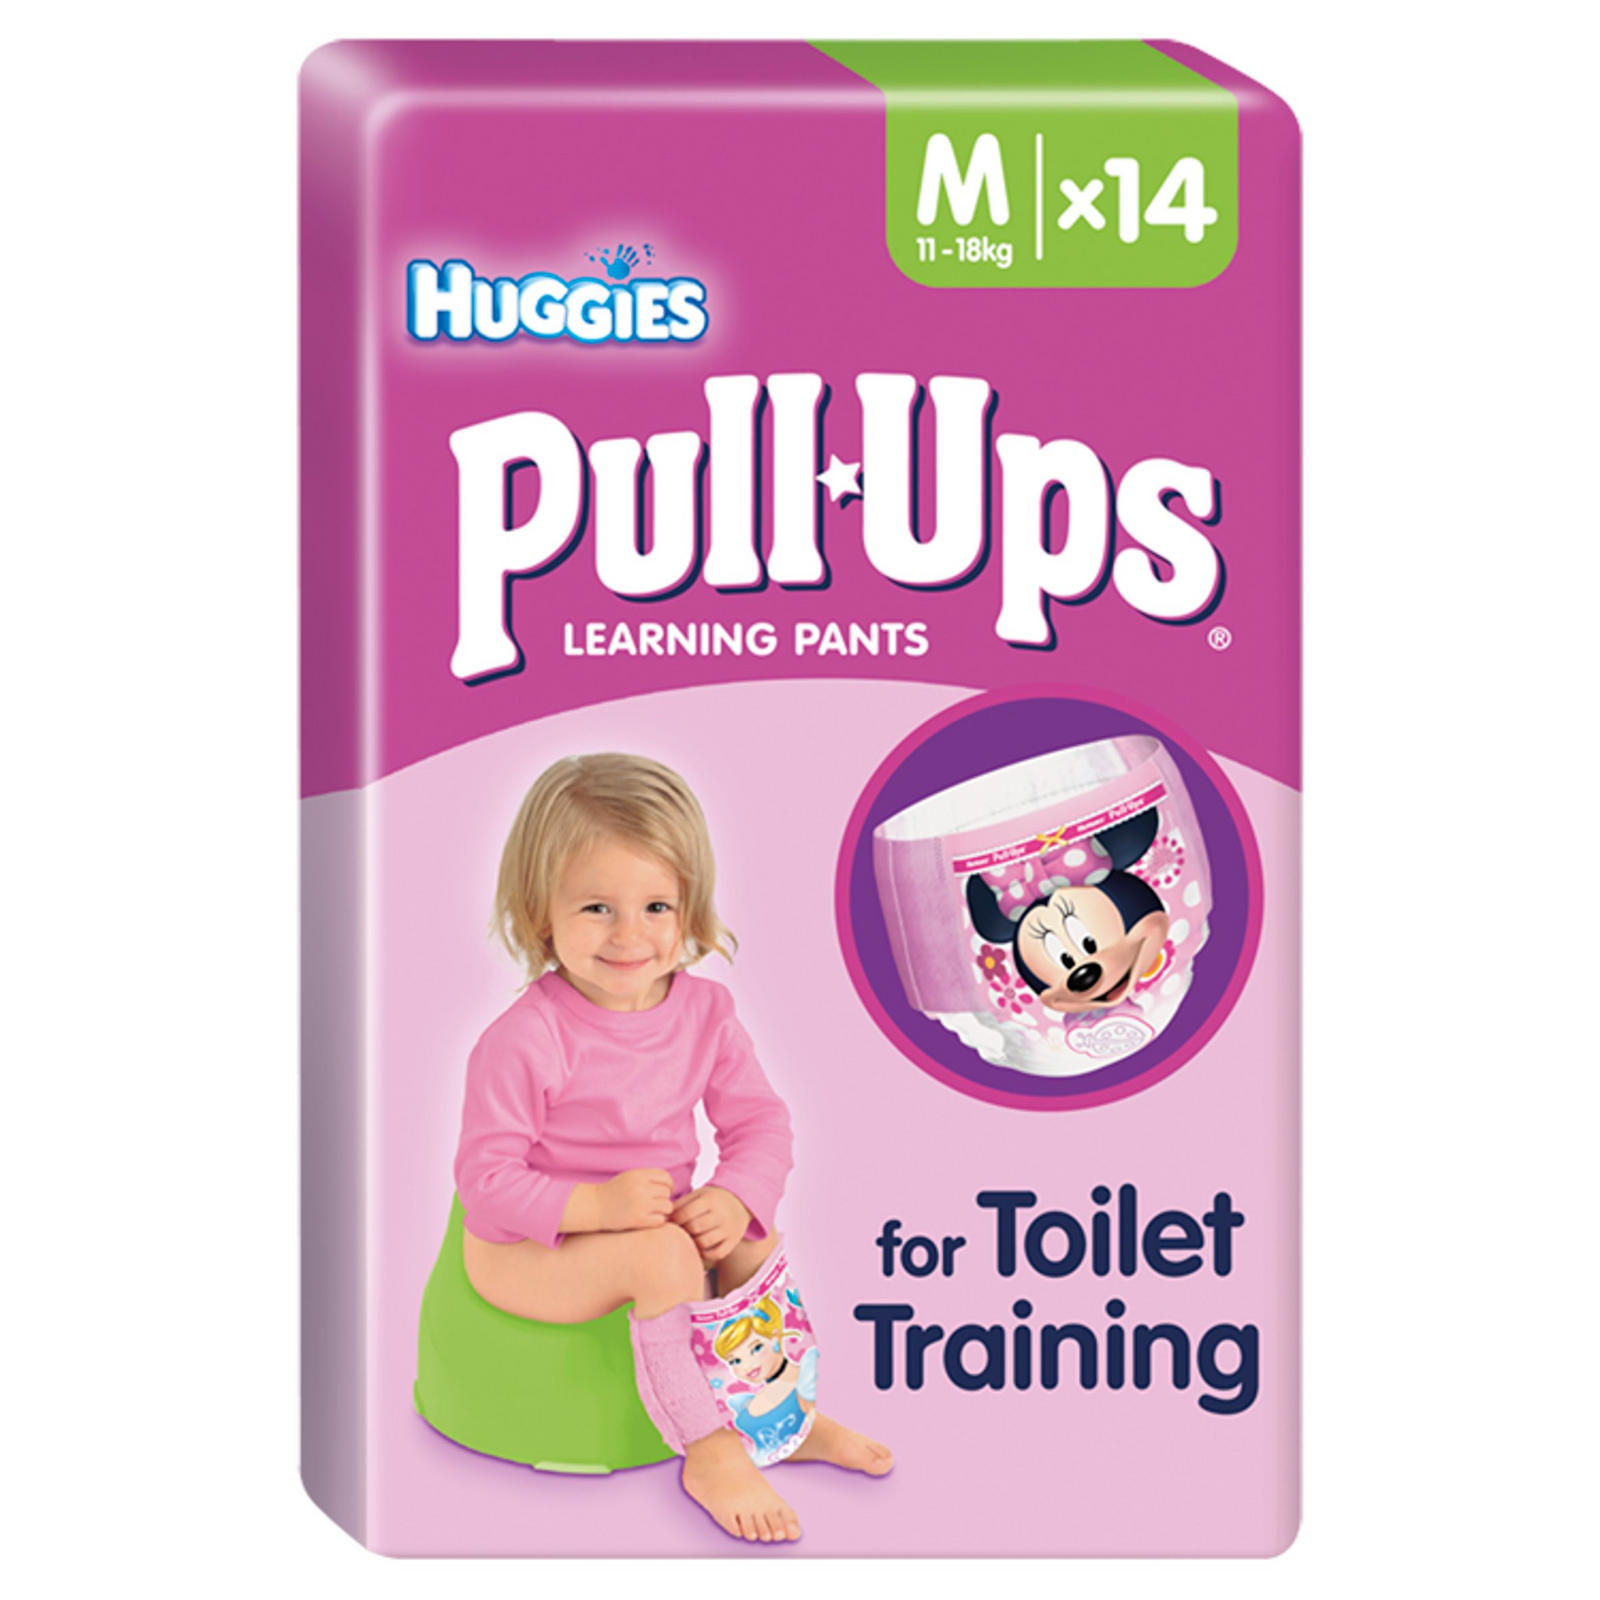 DAY IN THE LIFE OF POTTY TRAINING WITH HUGGIES PULL-UPS 